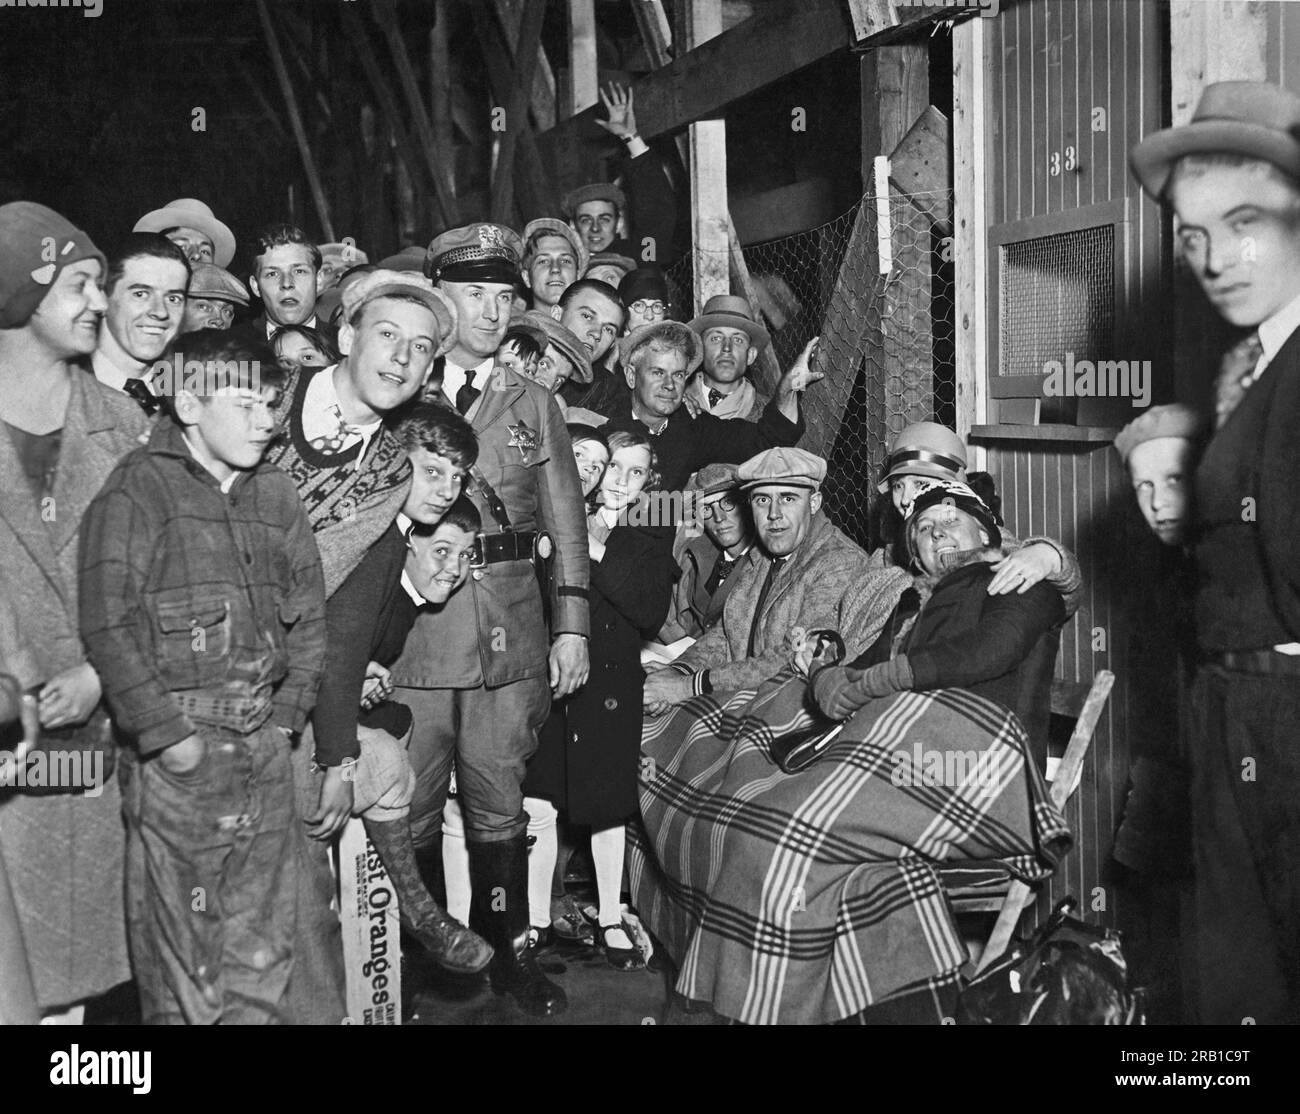 Chicago, Illinois:  October 8, 1929 Chicago Cubs baseball fans in line at 10 PM at Cubs Park to get grand stand tickets for the next day World Series game against the Philadelphia Athletics. Stock Photo